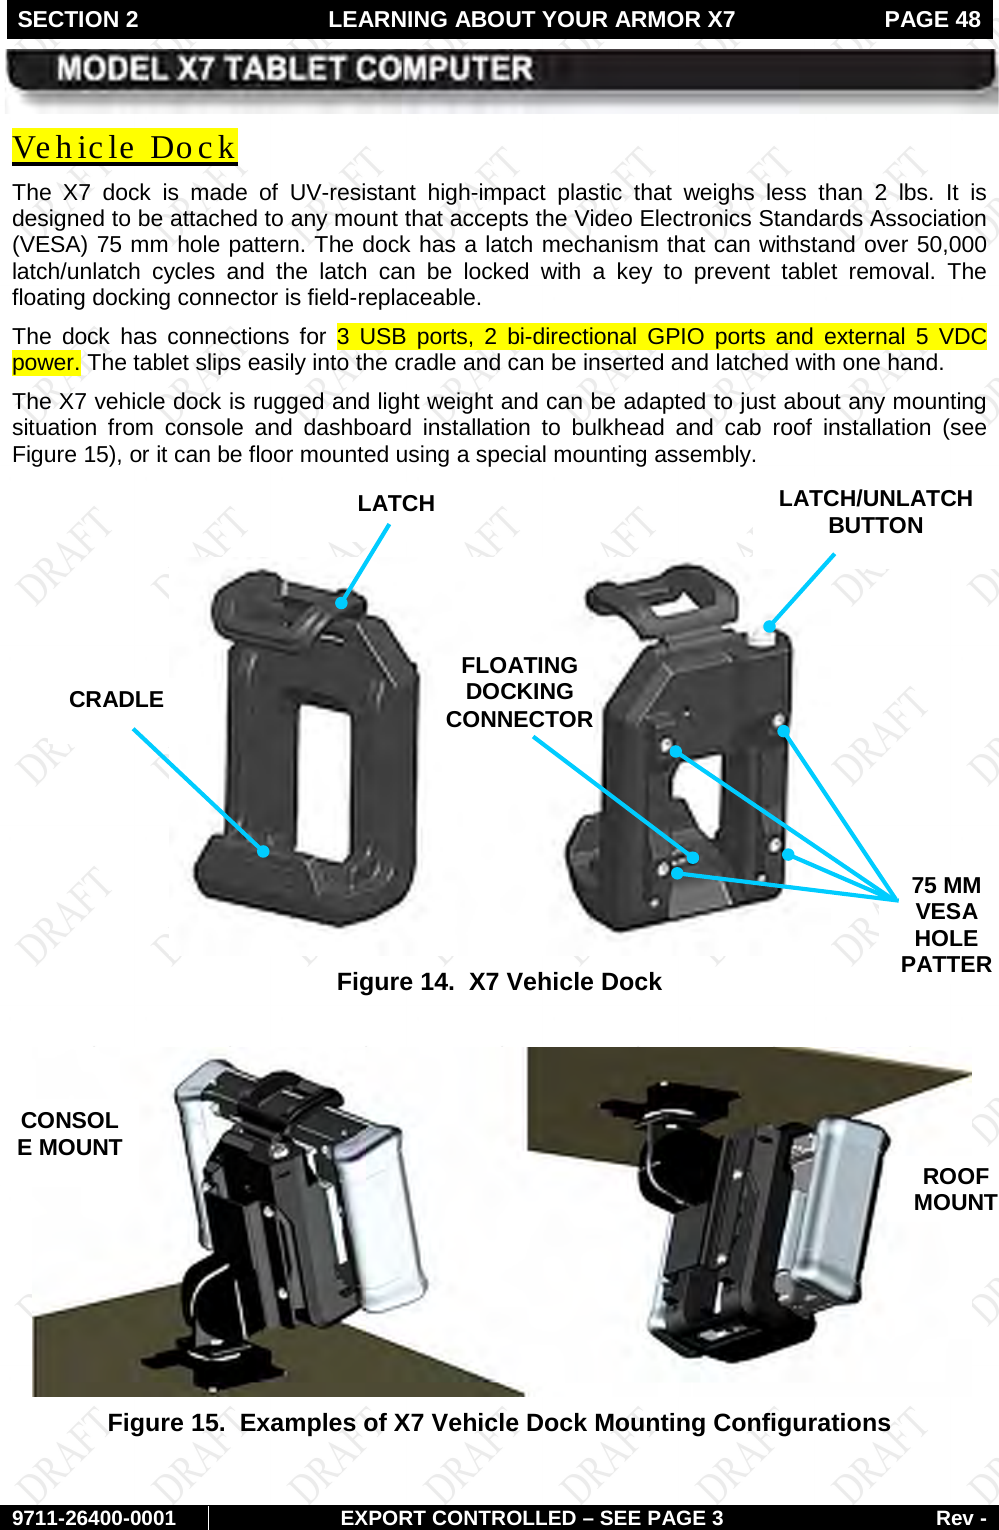 SECTION 2 LEARNING ABOUT YOUR ARMOR X7  PAGE 48        9711-26400-0001 EXPORT CONTROLLED – SEE PAGE 3 Rev - The X7 dock is made of UV-resistant high-impact plastic that weighs less than 2 lbs. It is designed to be attached to any mount that accepts the Video Electronics Standards Association (VESA) 75 mm hole pattern. The dock has a latch mechanism that can withstand over 50,000 latch/unlatch cycles and the latch can be locked with a key to prevent tablet removal. The floating docking connector is field-replaceable. Vehicle Dock The dock has connections for 3 USB ports, 2 bi-directional GPIO ports and external 5 VDC power. The tablet slips easily into the cradle and can be inserted and latched with one hand. The X7 vehicle dock is rugged and light weight and can be adapted to just about any mounting situation from console and dashboard installation to bulkhead and cab roof installation (see Figure 15), or it can be floor mounted using a special mounting assembly.    Figure 14.  X7 Vehicle Dock   Figure 15.  Examples of X7 Vehicle Dock Mounting Configurations   LATCH LATCH/UNLATCH  BUTTON 75 MM VESA HOLE PATTER CRADLE FLOATING  DOCKING CONNECTOR CONSOLE MOUNT ROOF MOUNT FINGERPRINT SENSOR (FPS) 